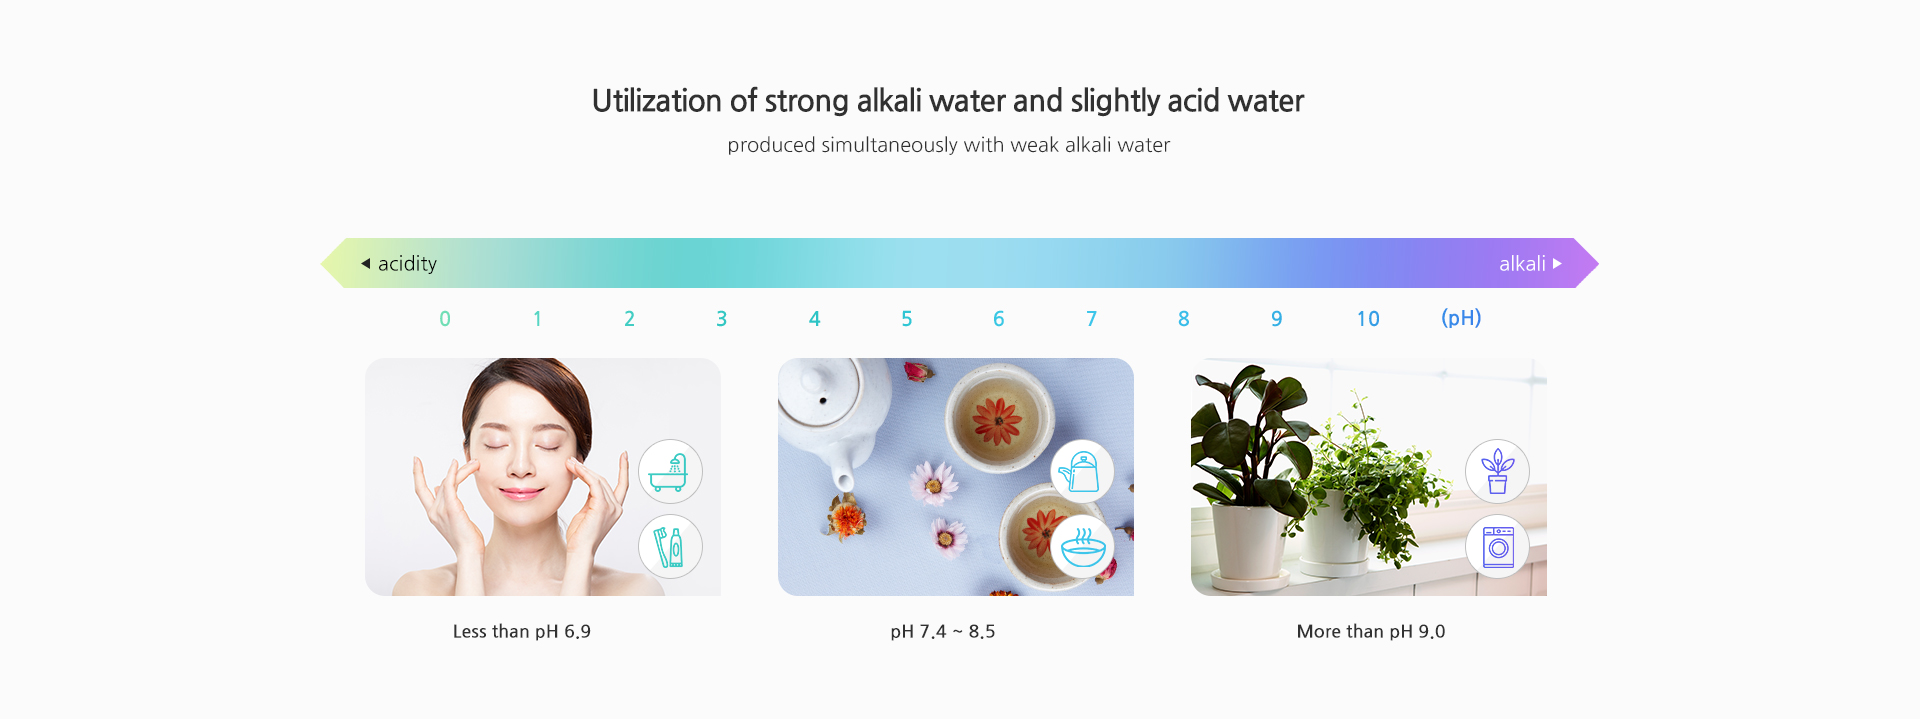 Utilization of strong alkali water and slightly acid water,produced simultaneously with weak alkali water